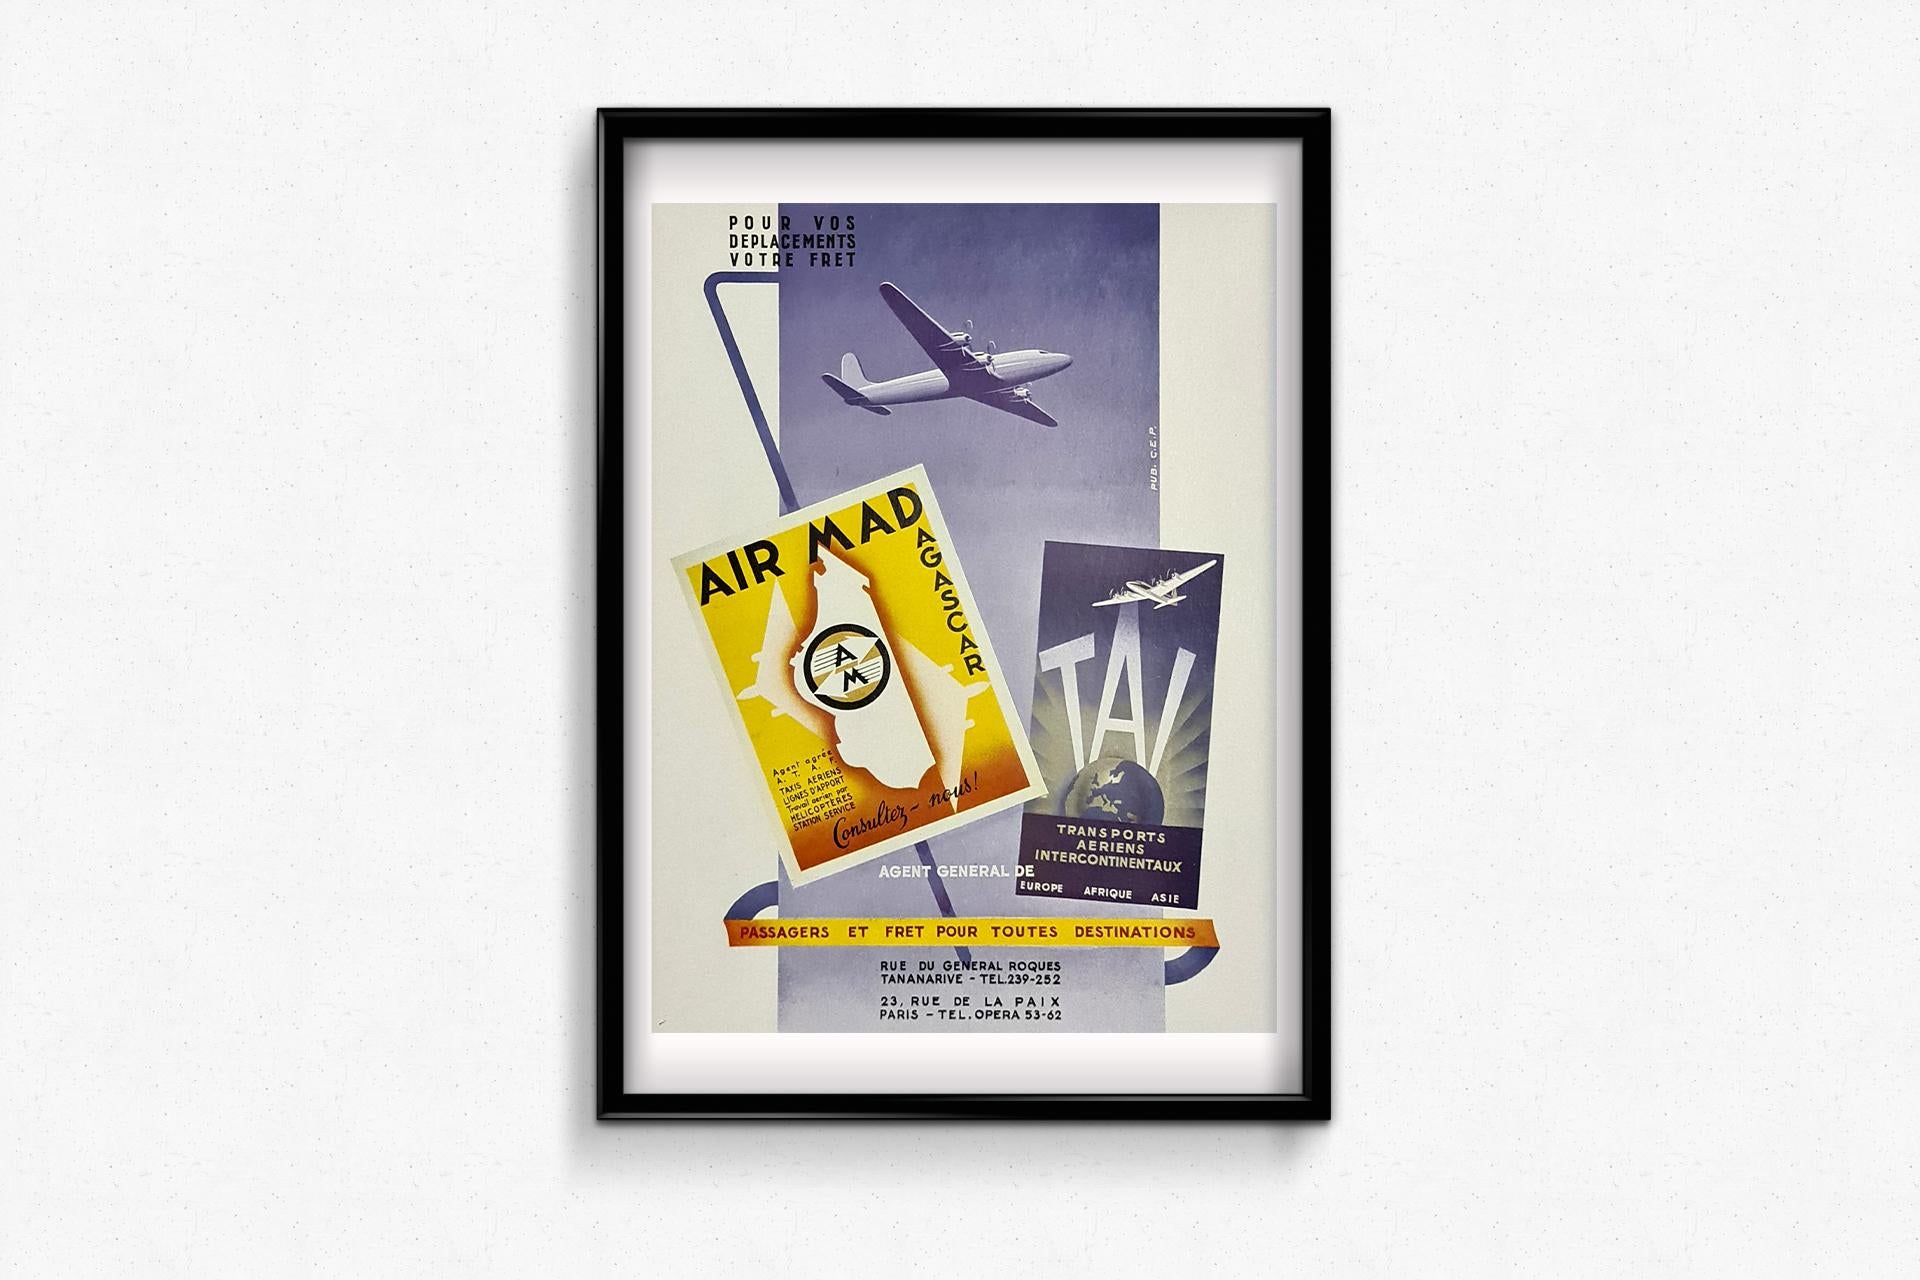 Circa 1930 Original poster for the airline TAI and its trips to Madagascar - Art Deco Print by Unknown